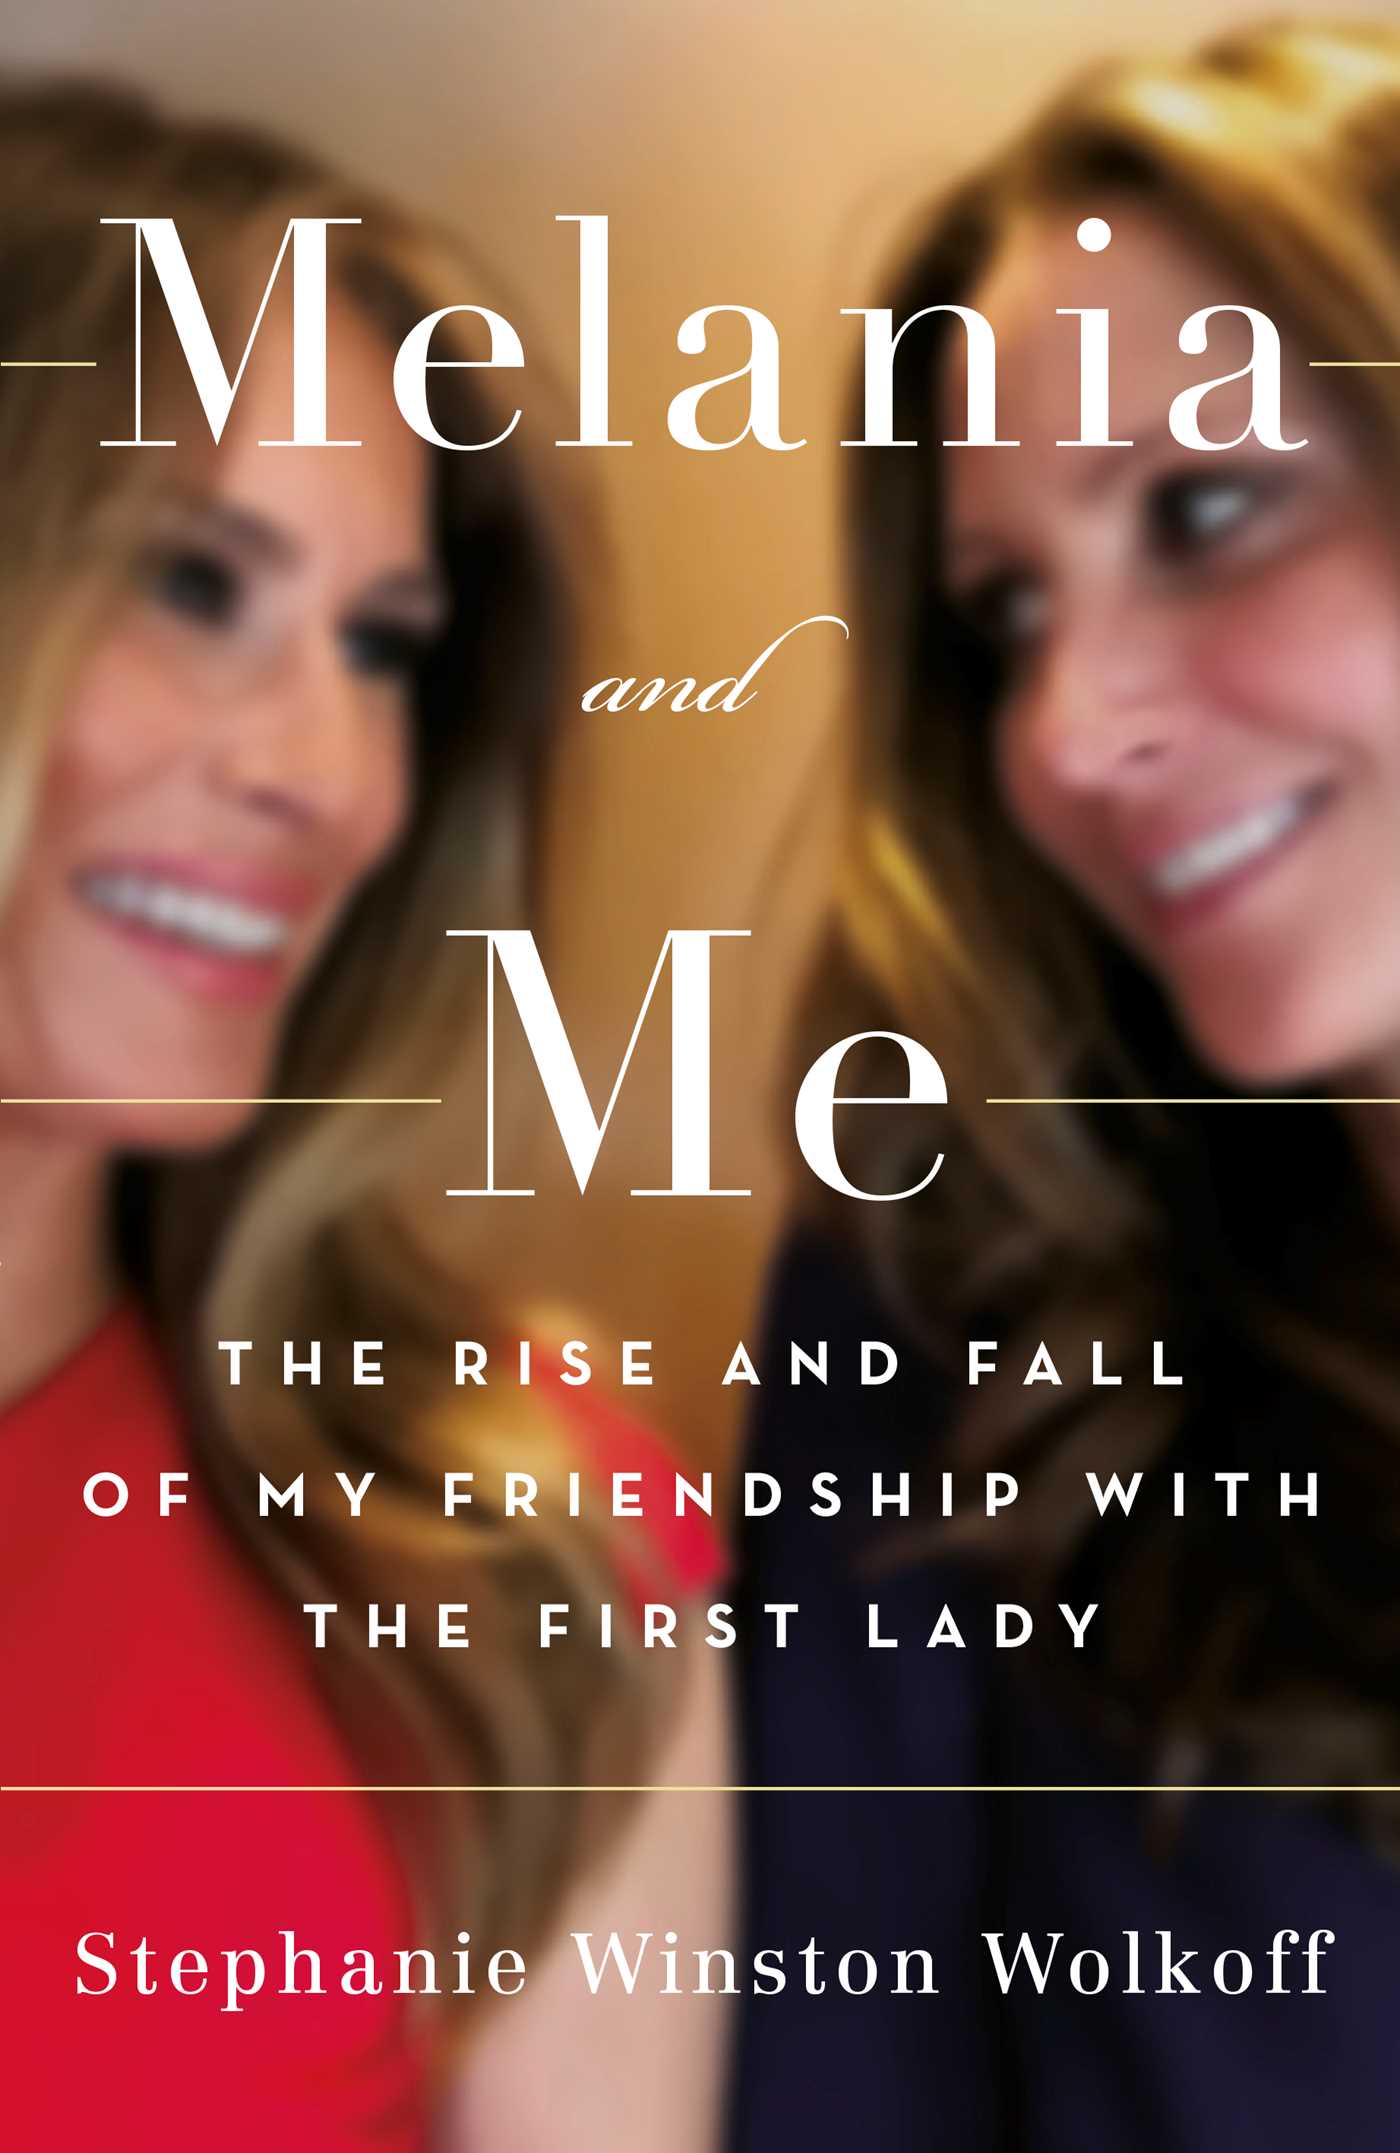 Melania and Me: The Rise and Fall of My Friendship with the First Lady Hardcover Book RRP 20 CLEARANCE XL 9.99